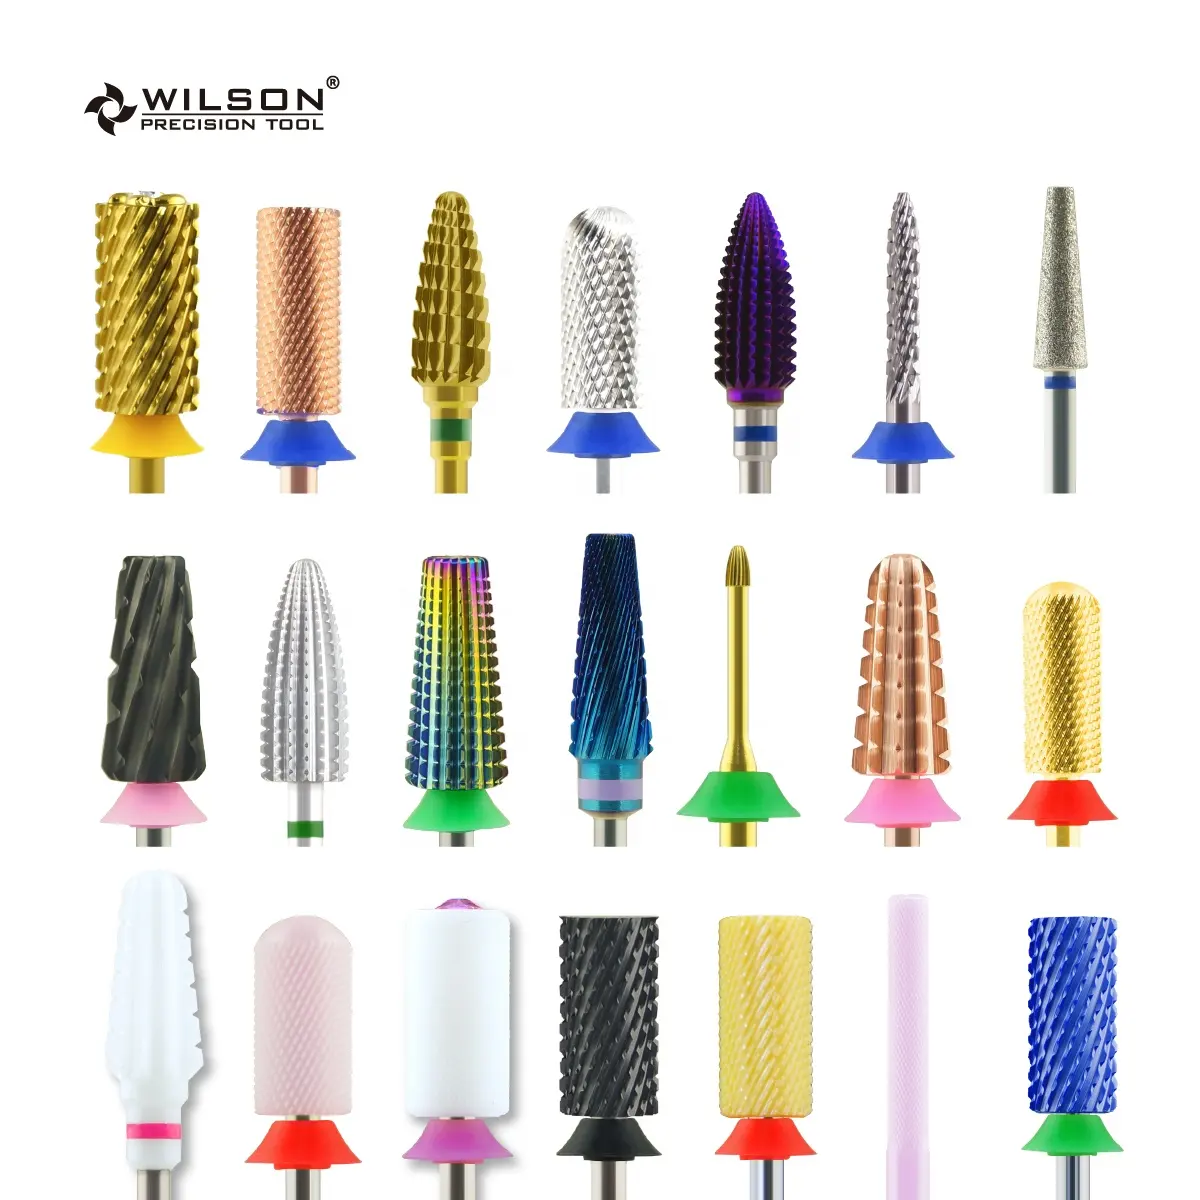 New Arrival Factory Cheap Wilson High Quality 5 in 1 nails drill bit 3 in1